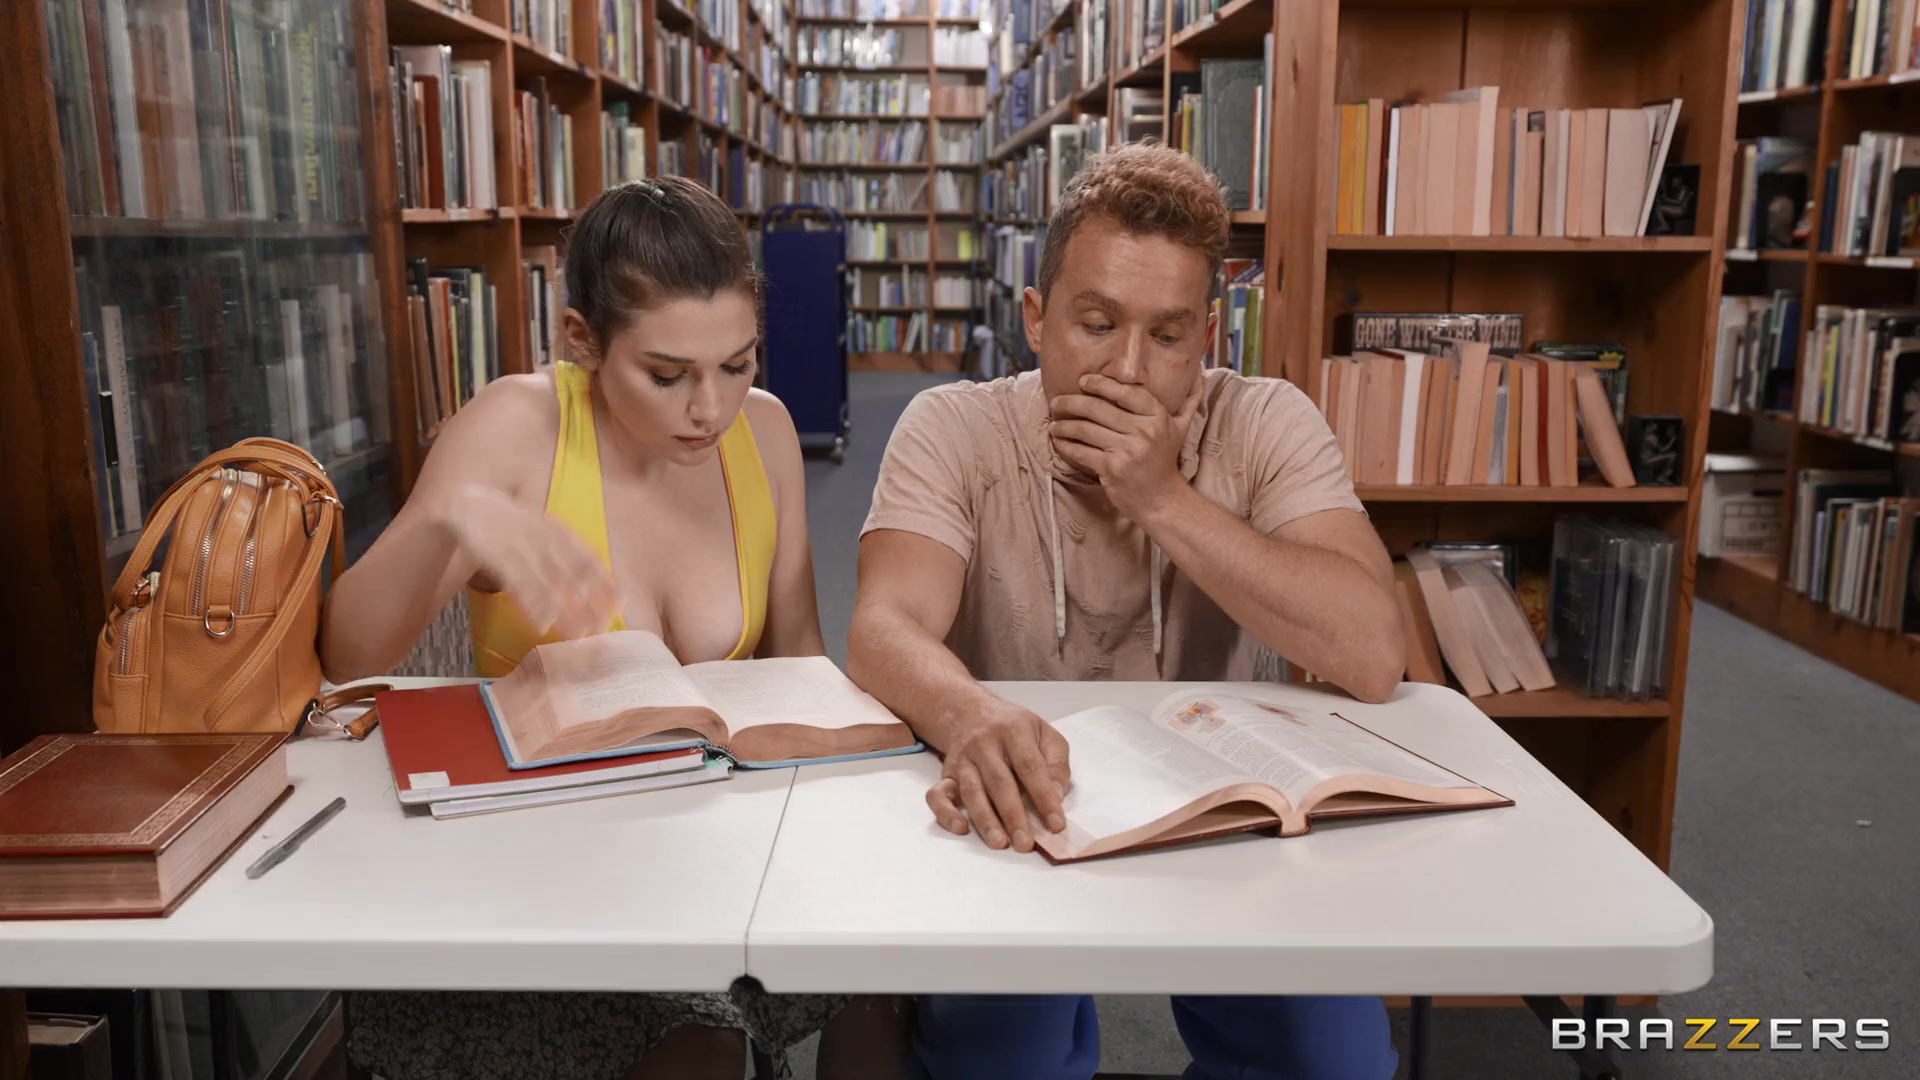 Porn video in library